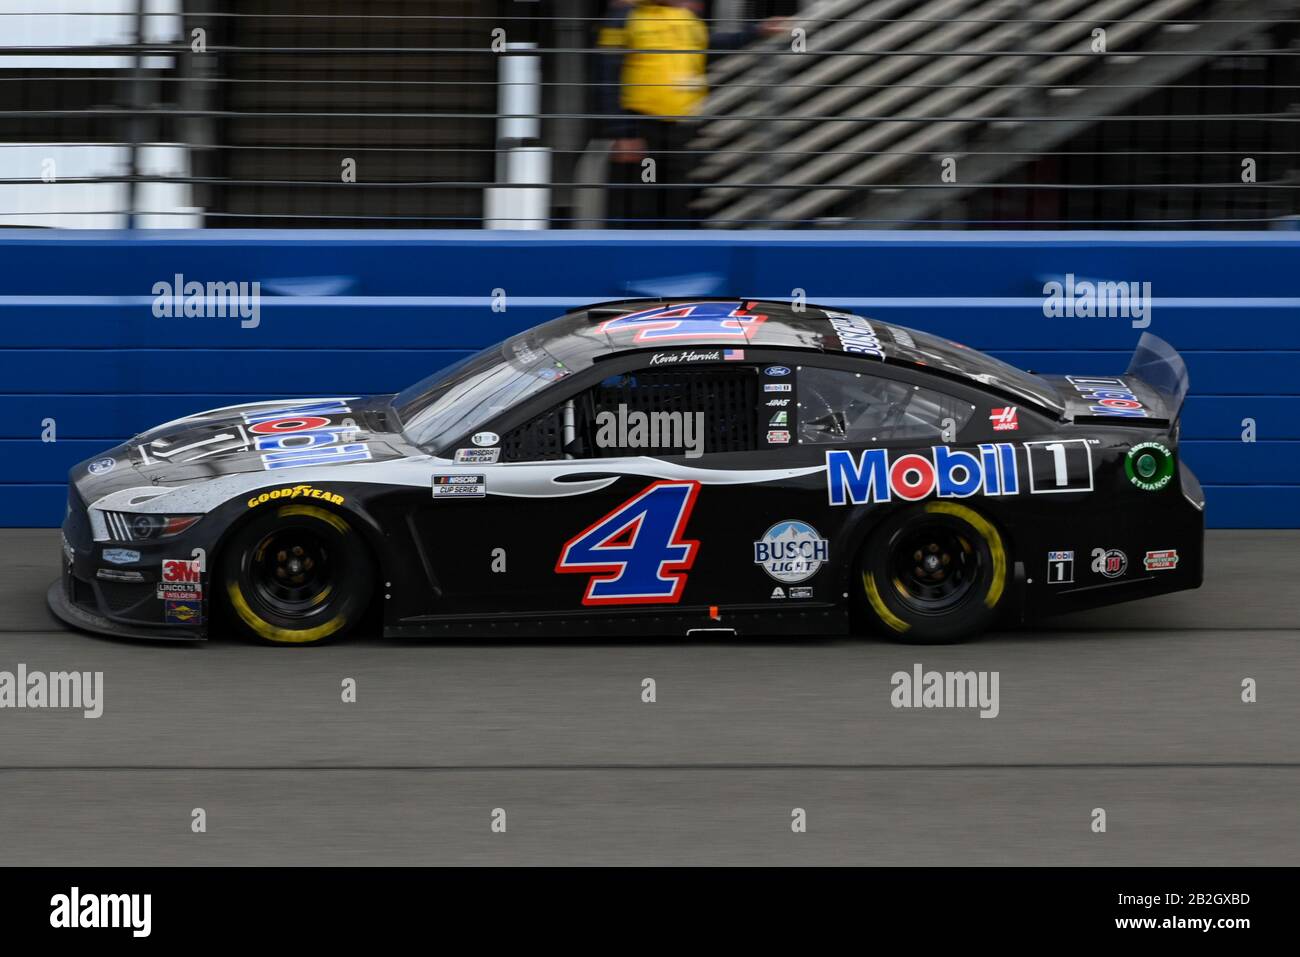 NASCAR Cup Series driver Kevin Harvick (4) during the NASCAR Auto Club 400, Sunday, Mar. 1, 2020, in Fontana, California, USA. (Photo by IOS/ESPA-Images) Stock Photo